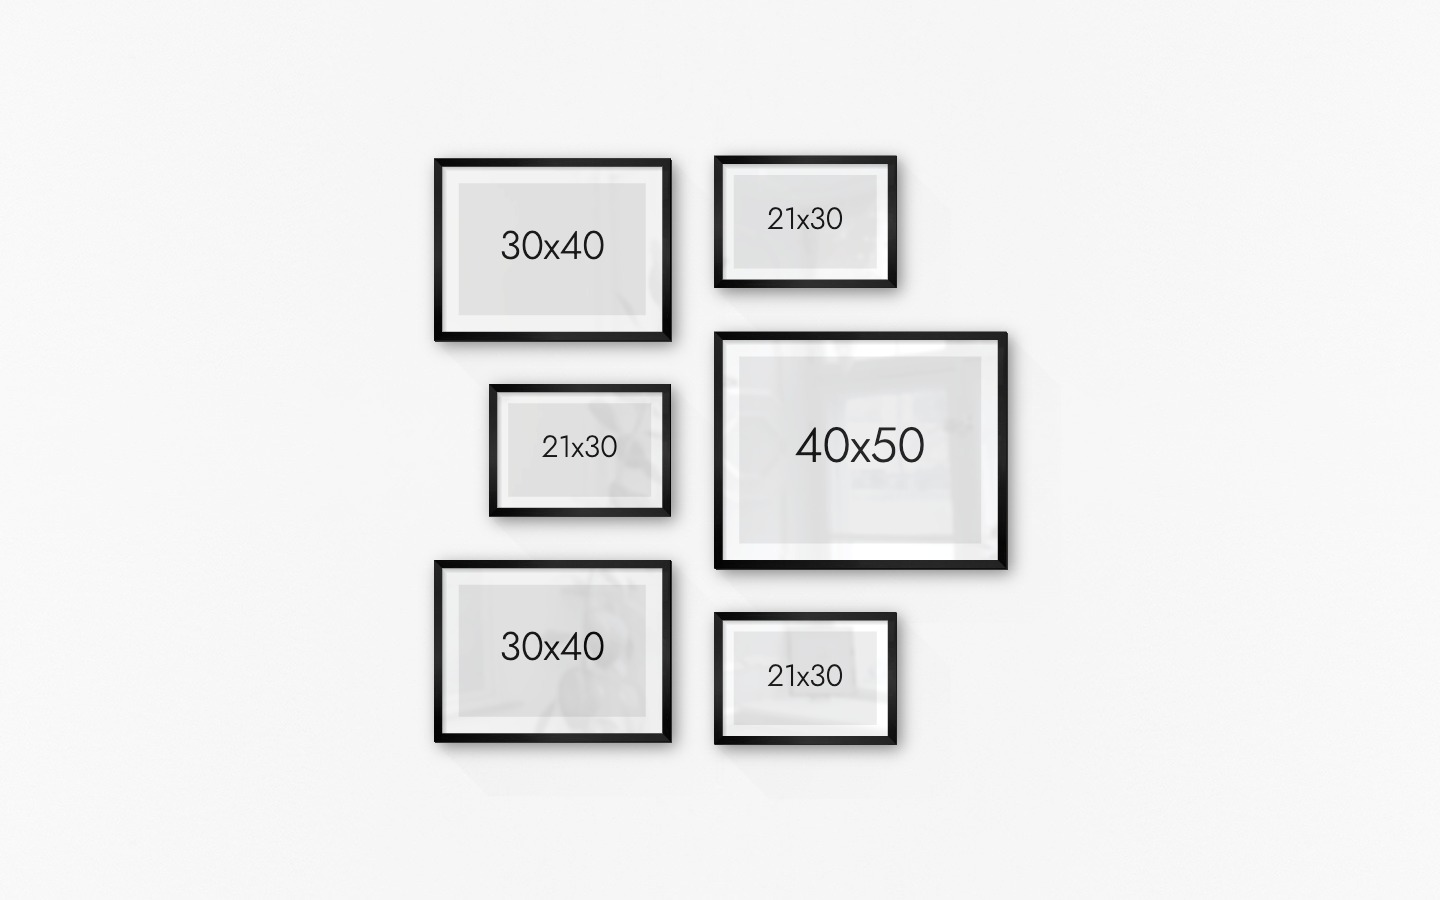 Gallery wall with picture frames in black in sizes 30x40, 21x30 and 40x50